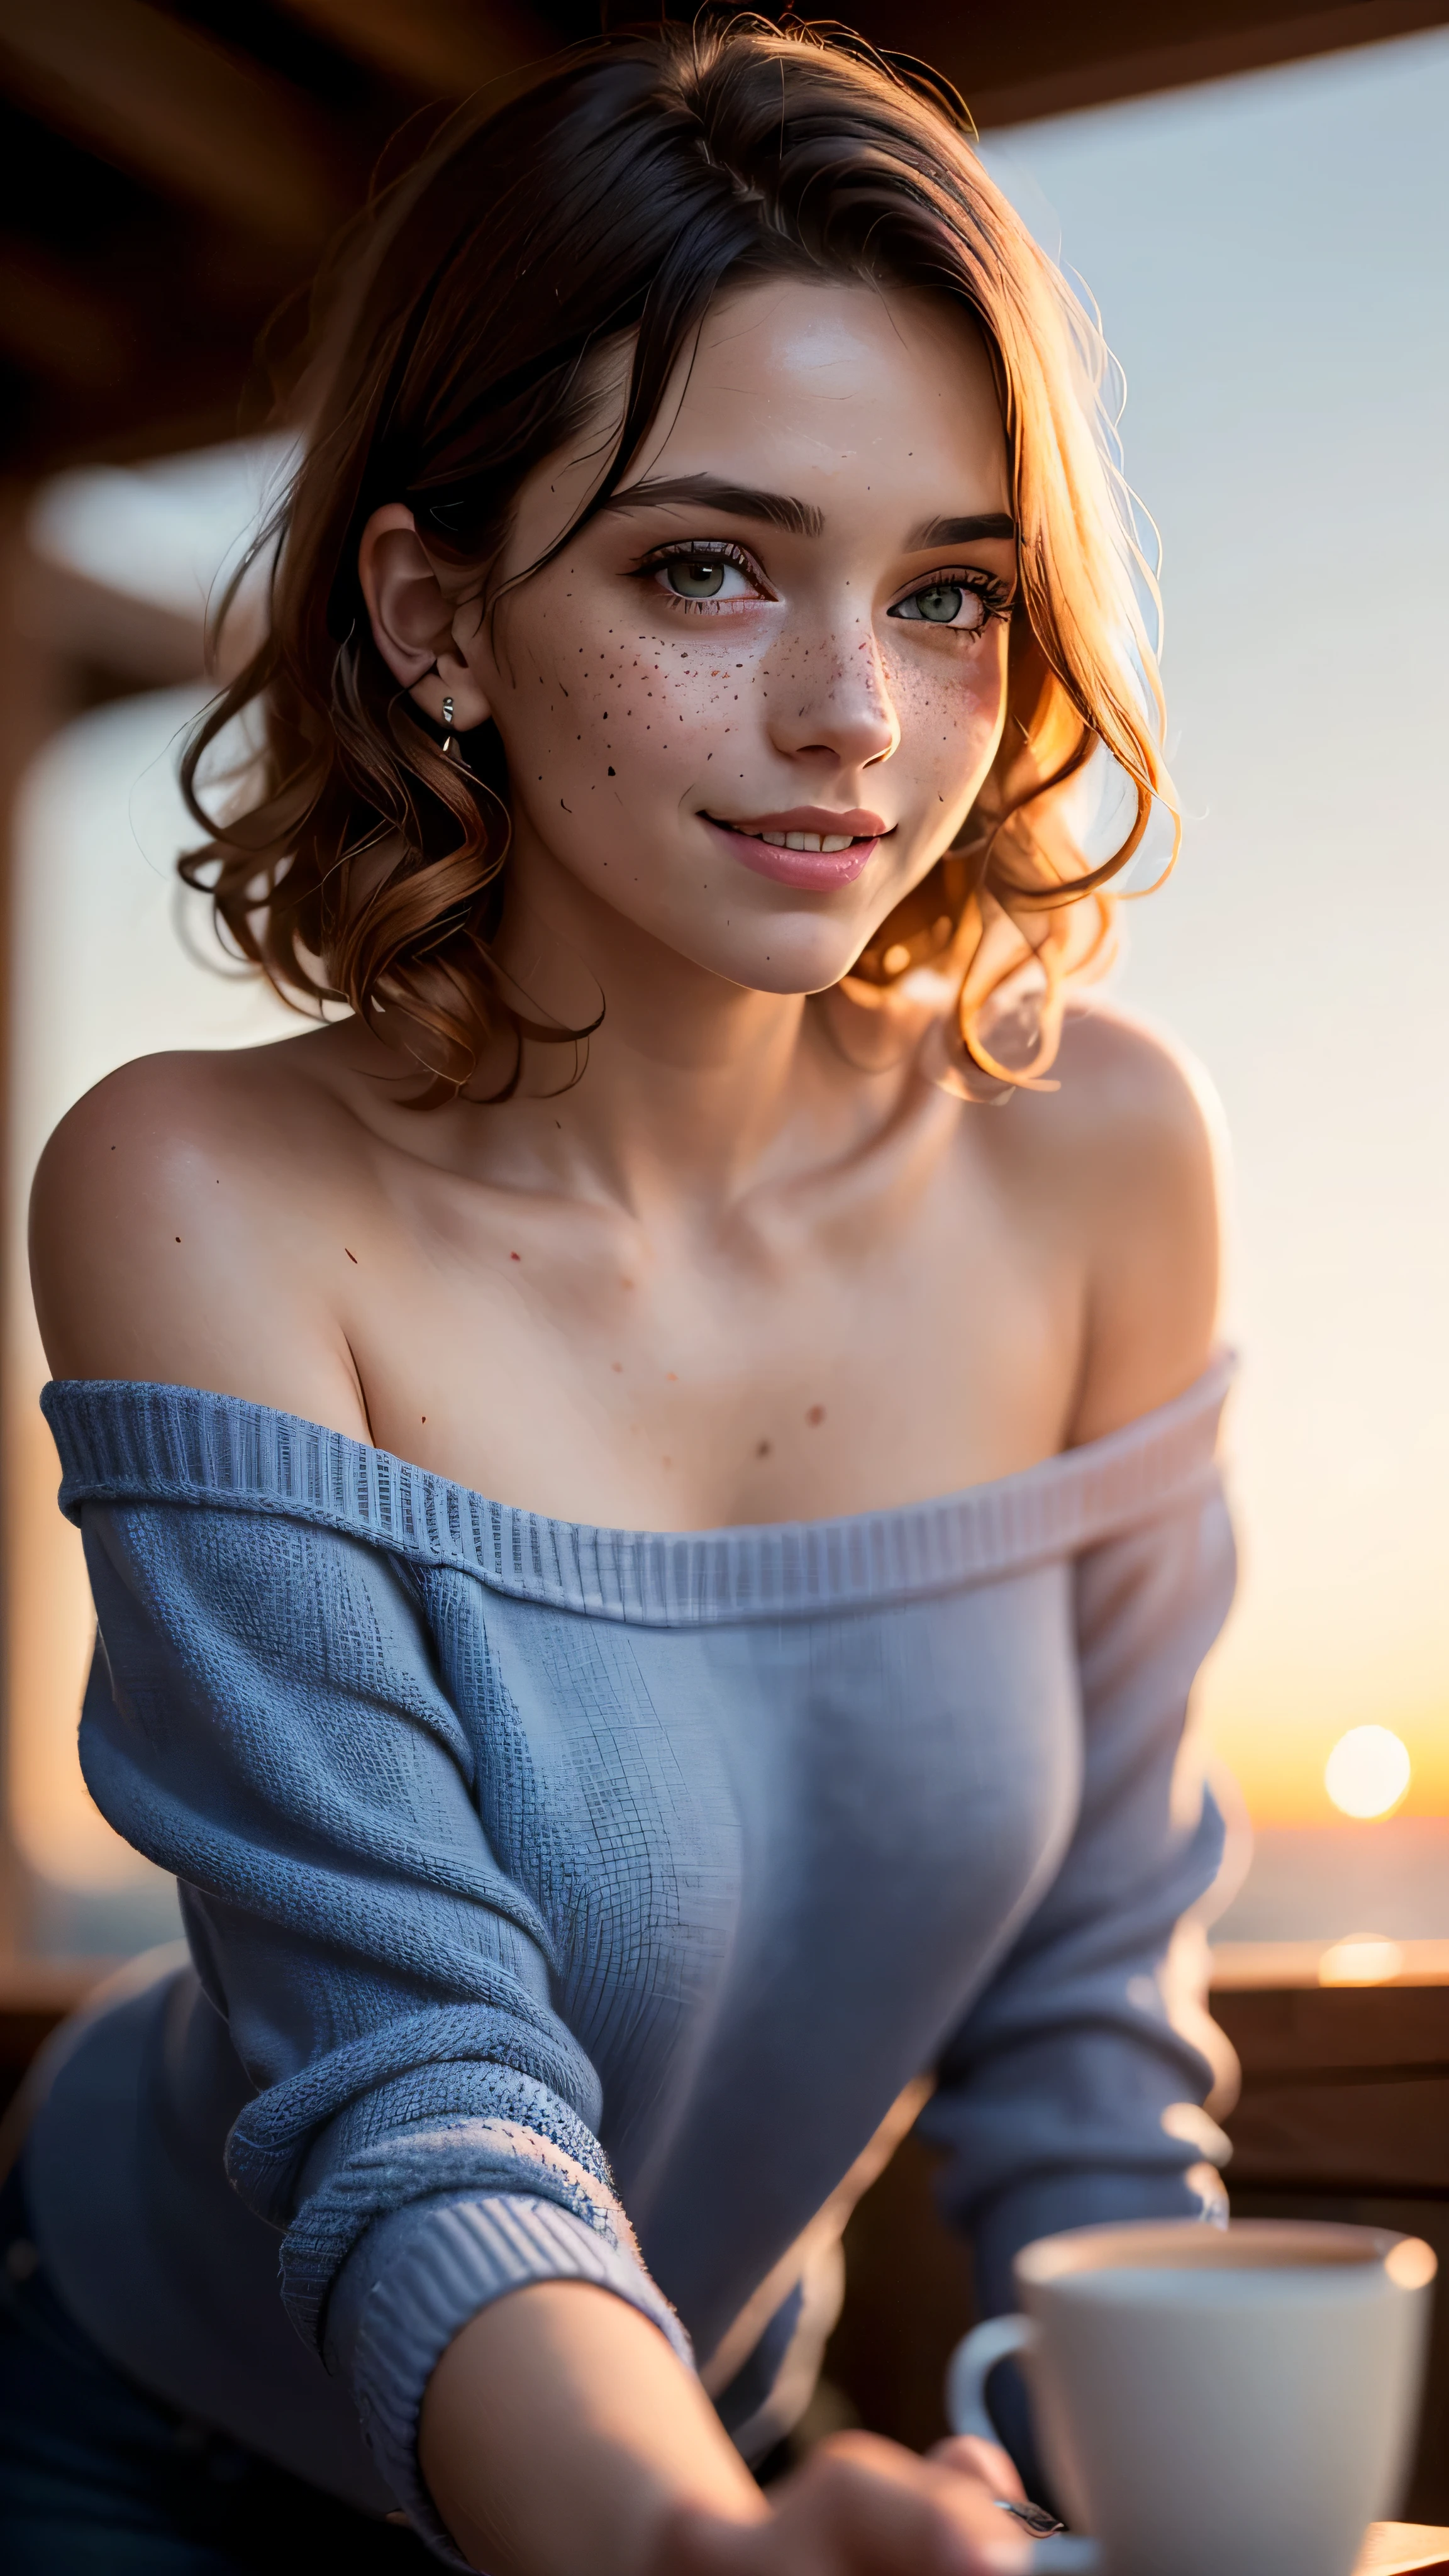 (masterpiece), (extremely intricate:1.3), (realistic), (((portrait, closeup)), joyful, smiling) short curly Ginger girl, cleargreen eyes, leaning forward, loose blue knit sweatshirt off shoulder, cafe, far away crowd, bokeh, freckles:0.4, dimple:1.2, ((tanned skin)), small breasts, upper body, outdoor, intense sunlight, professional photograph of a stunning woman detailed, (sharp focus, dramatic, award winning, cinematic lighting, volumetrics dtx, (film grain, blurry background, blurry foreground, bokeh, depth of field, sunset, interaction), 8K